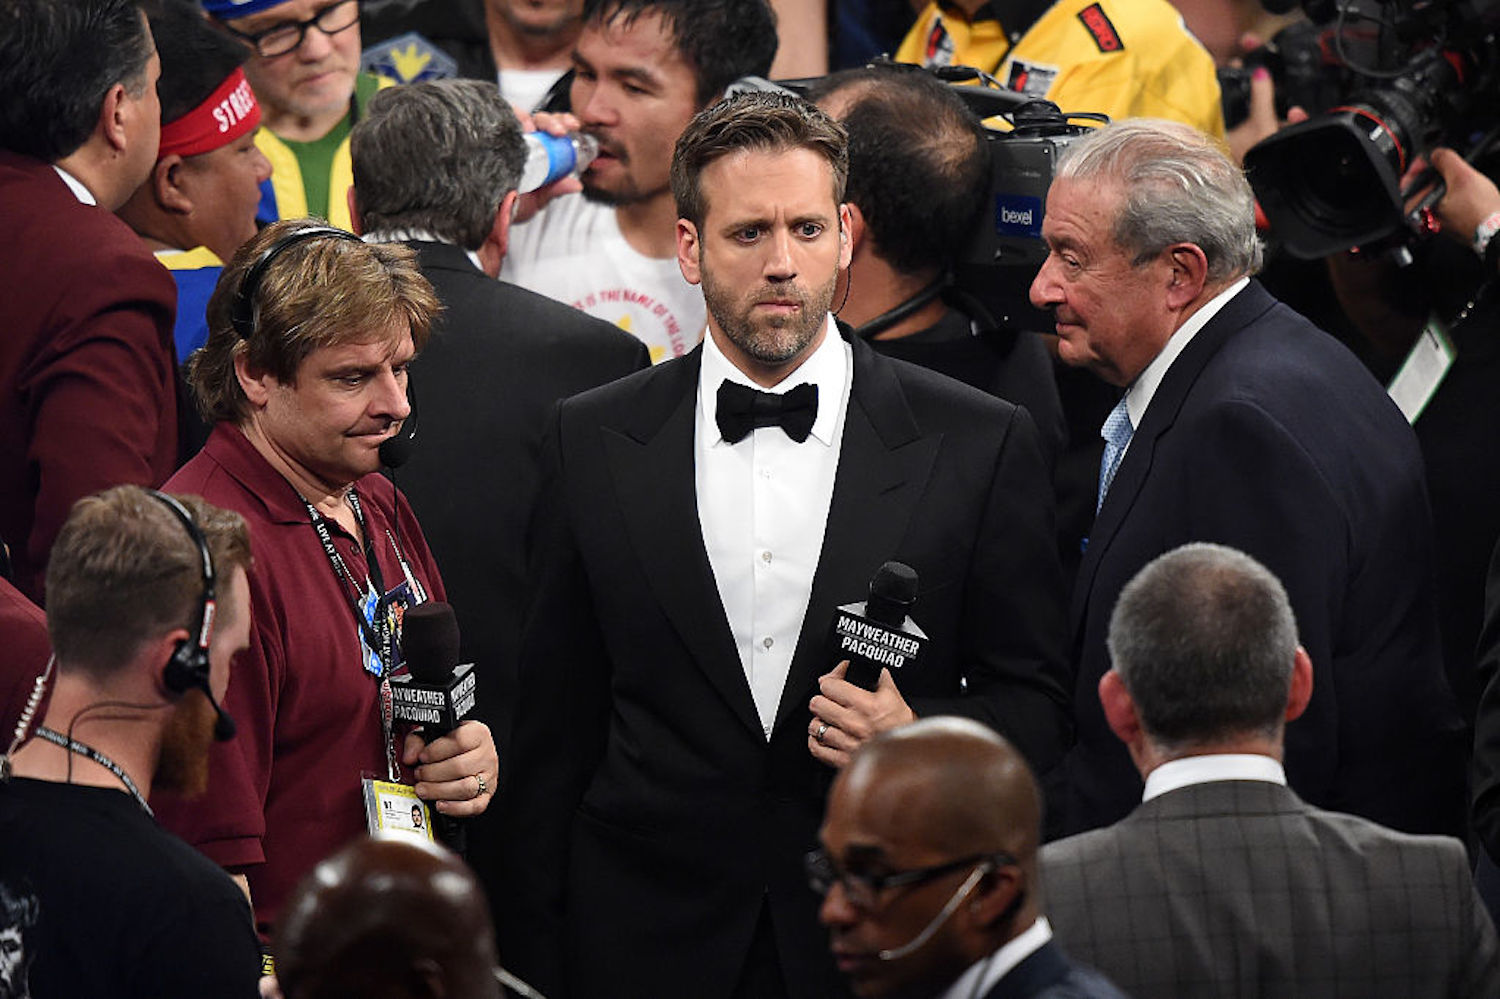 ESPN's Max Kellerman called Tom Brady a 'bum' and said he would 'fall off a cliff' in 2016, and his day of reckoning finally came this week.